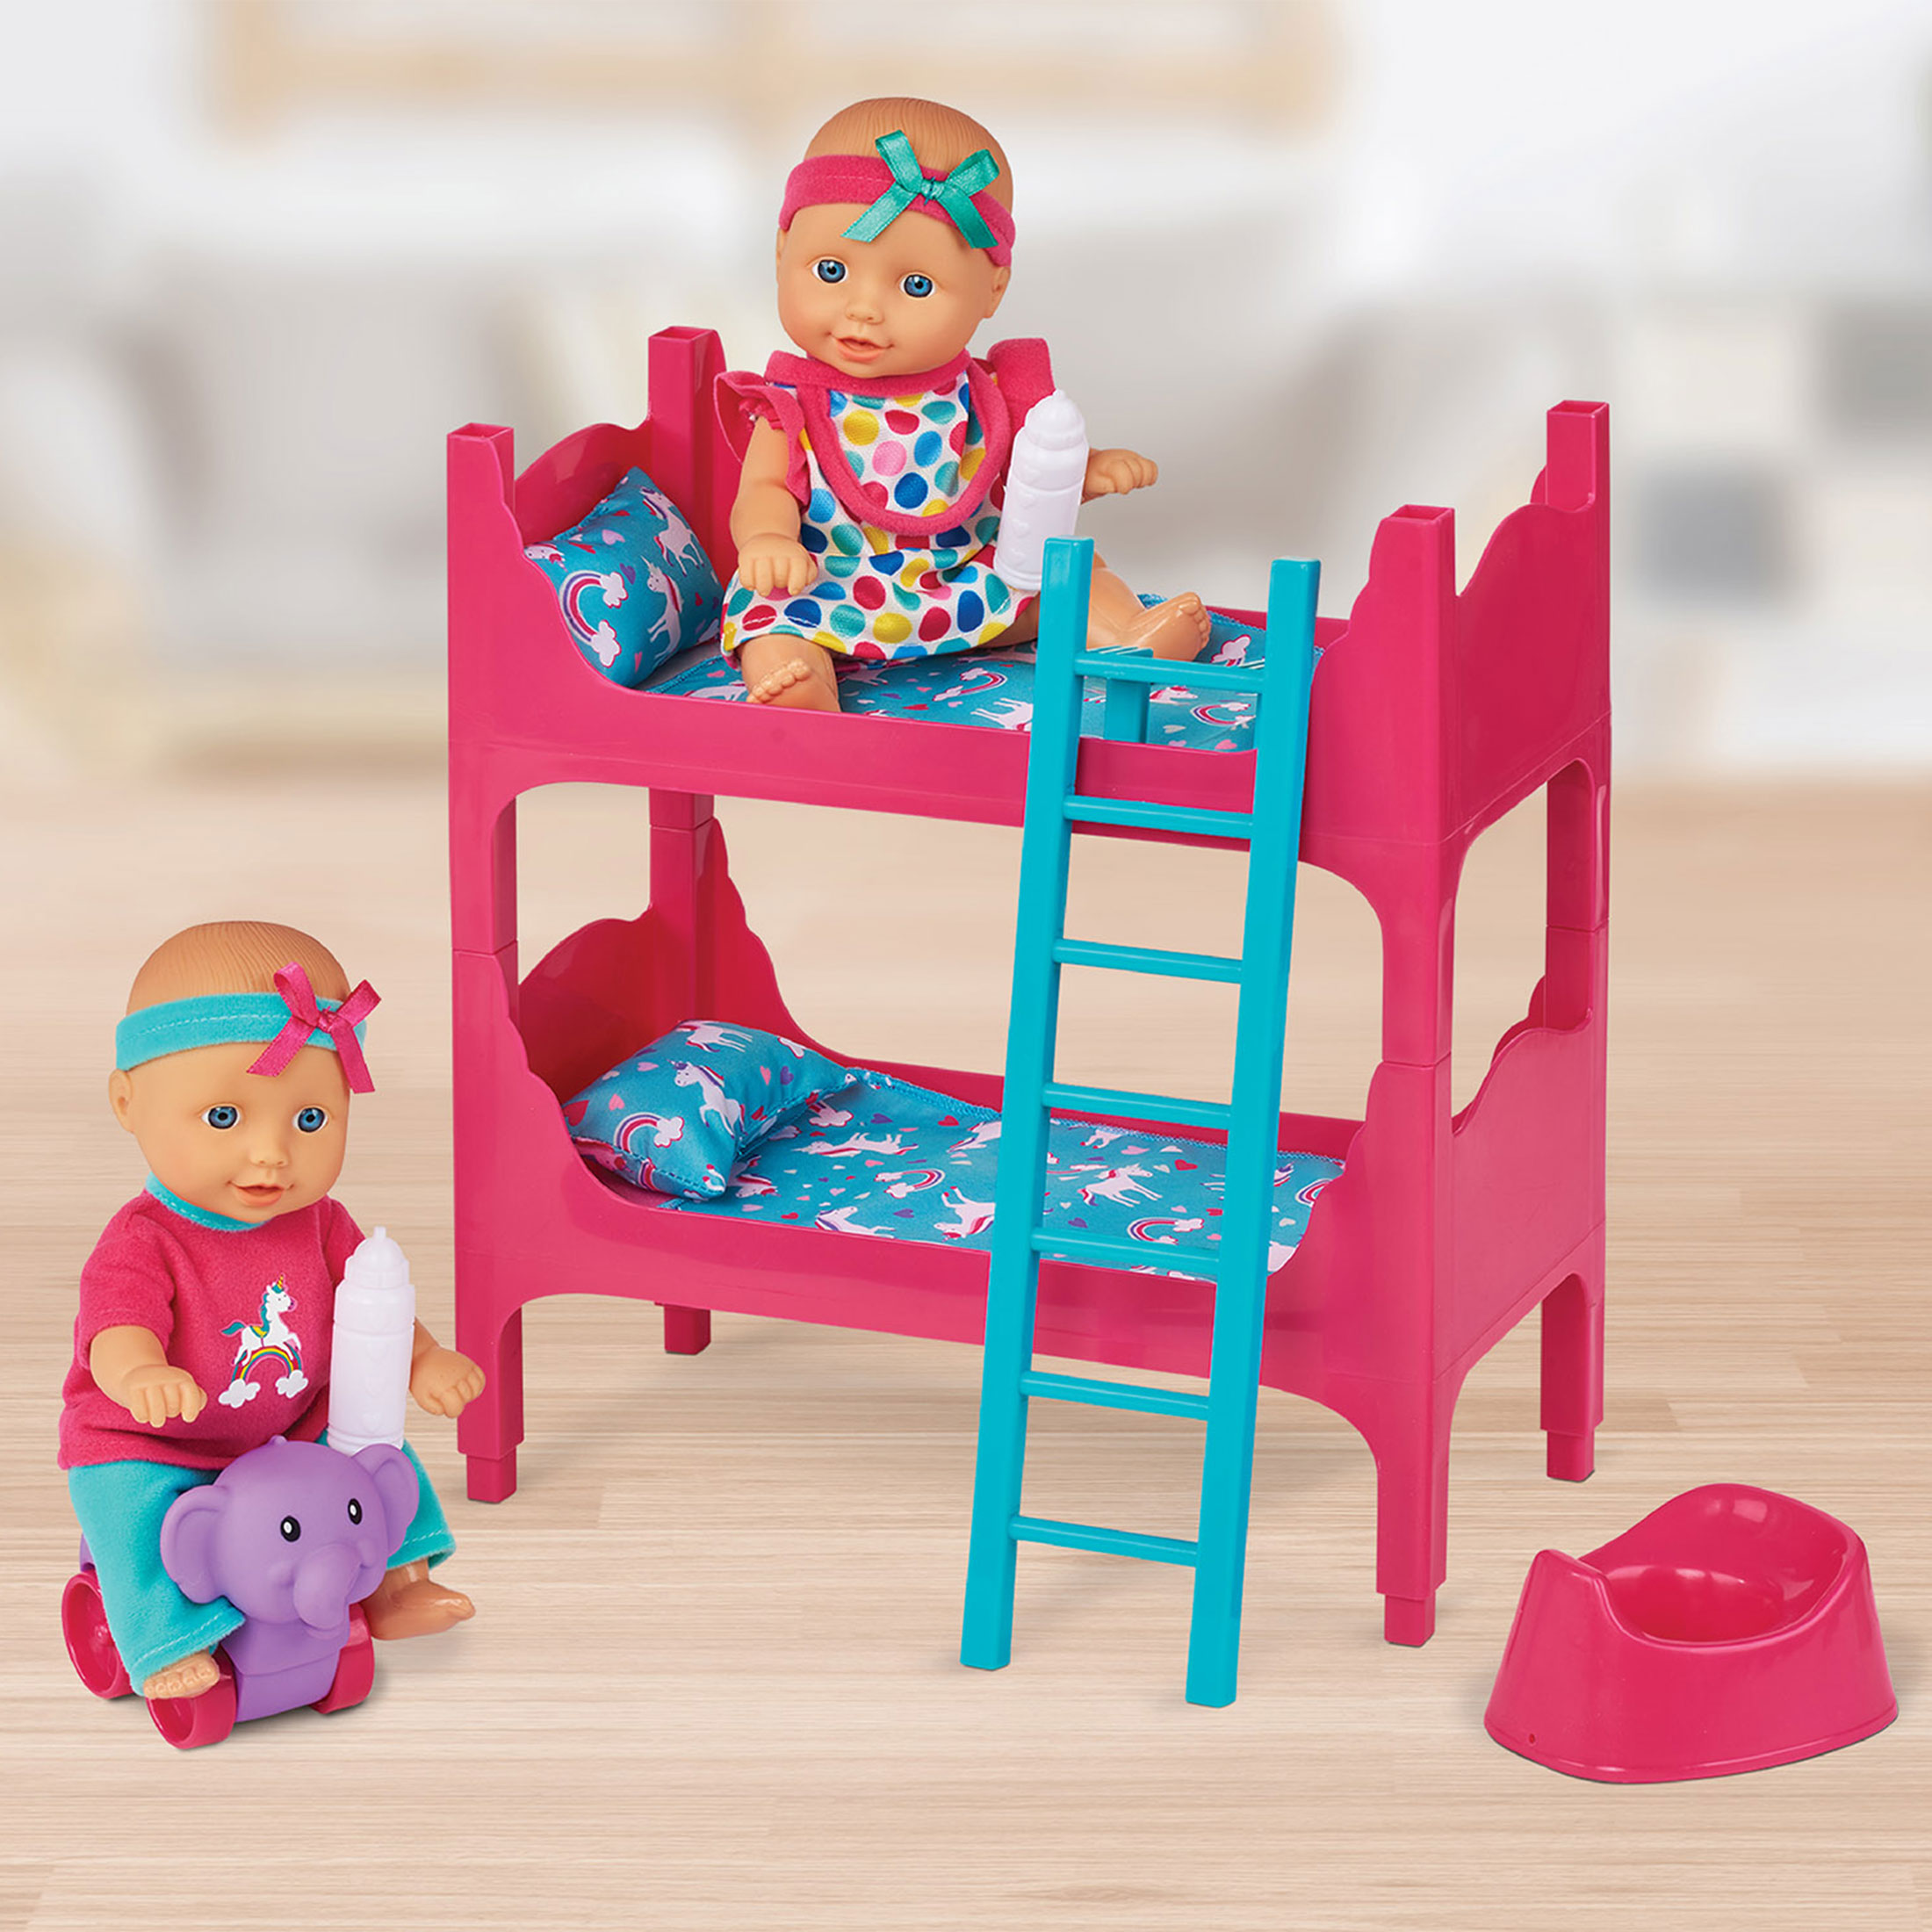 Kid Connection Baby Doll Room Play Set, Blue Eyes, Light Skin Tone - image 5 of 5